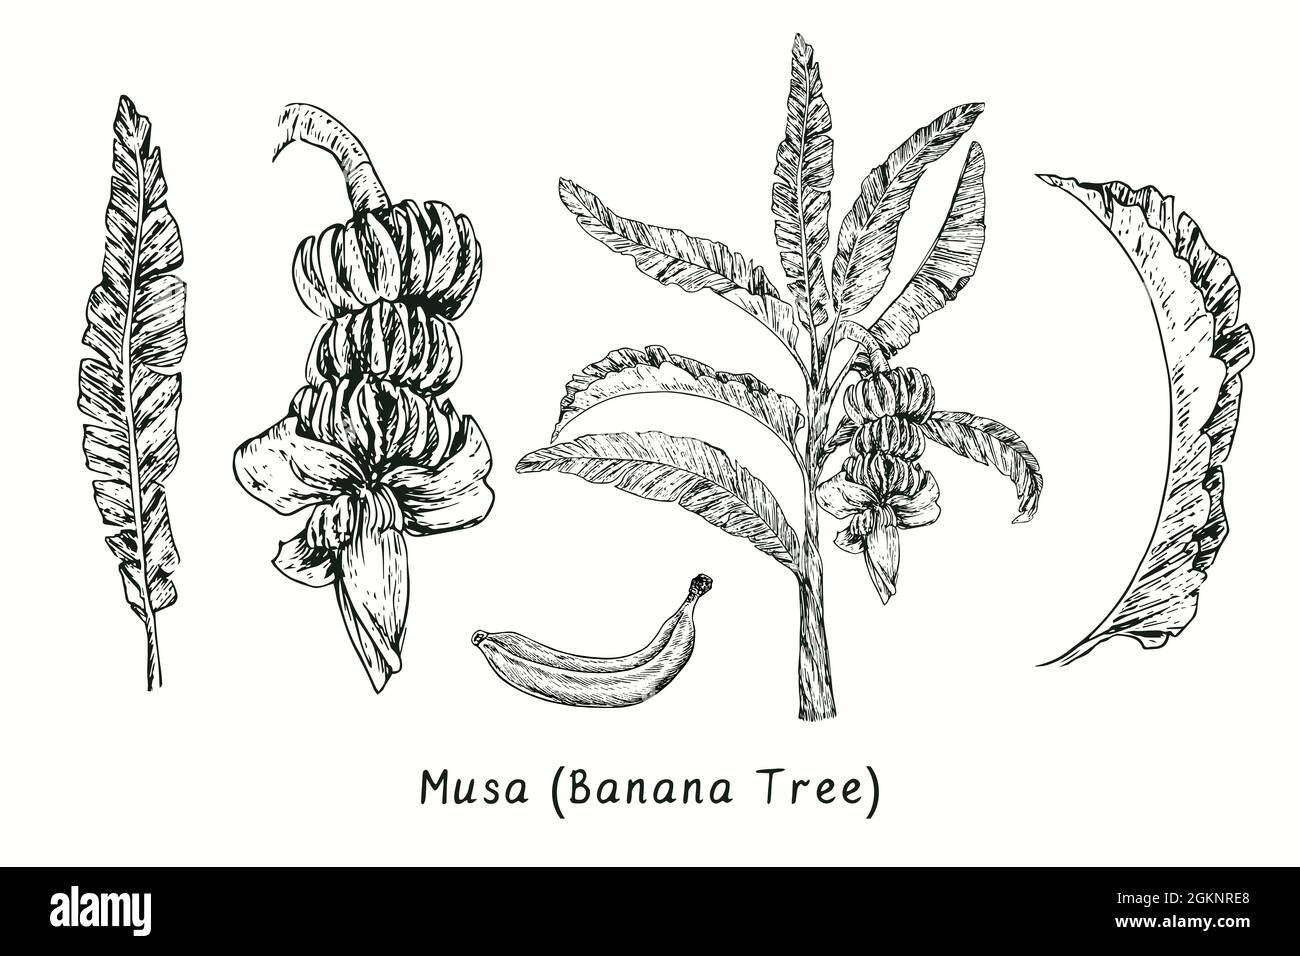 Musa (Banana tree) leaf, fruit bunch, tree, isolated fruit. Ink black and white doodle drawing in woodcut style. Stock Photo